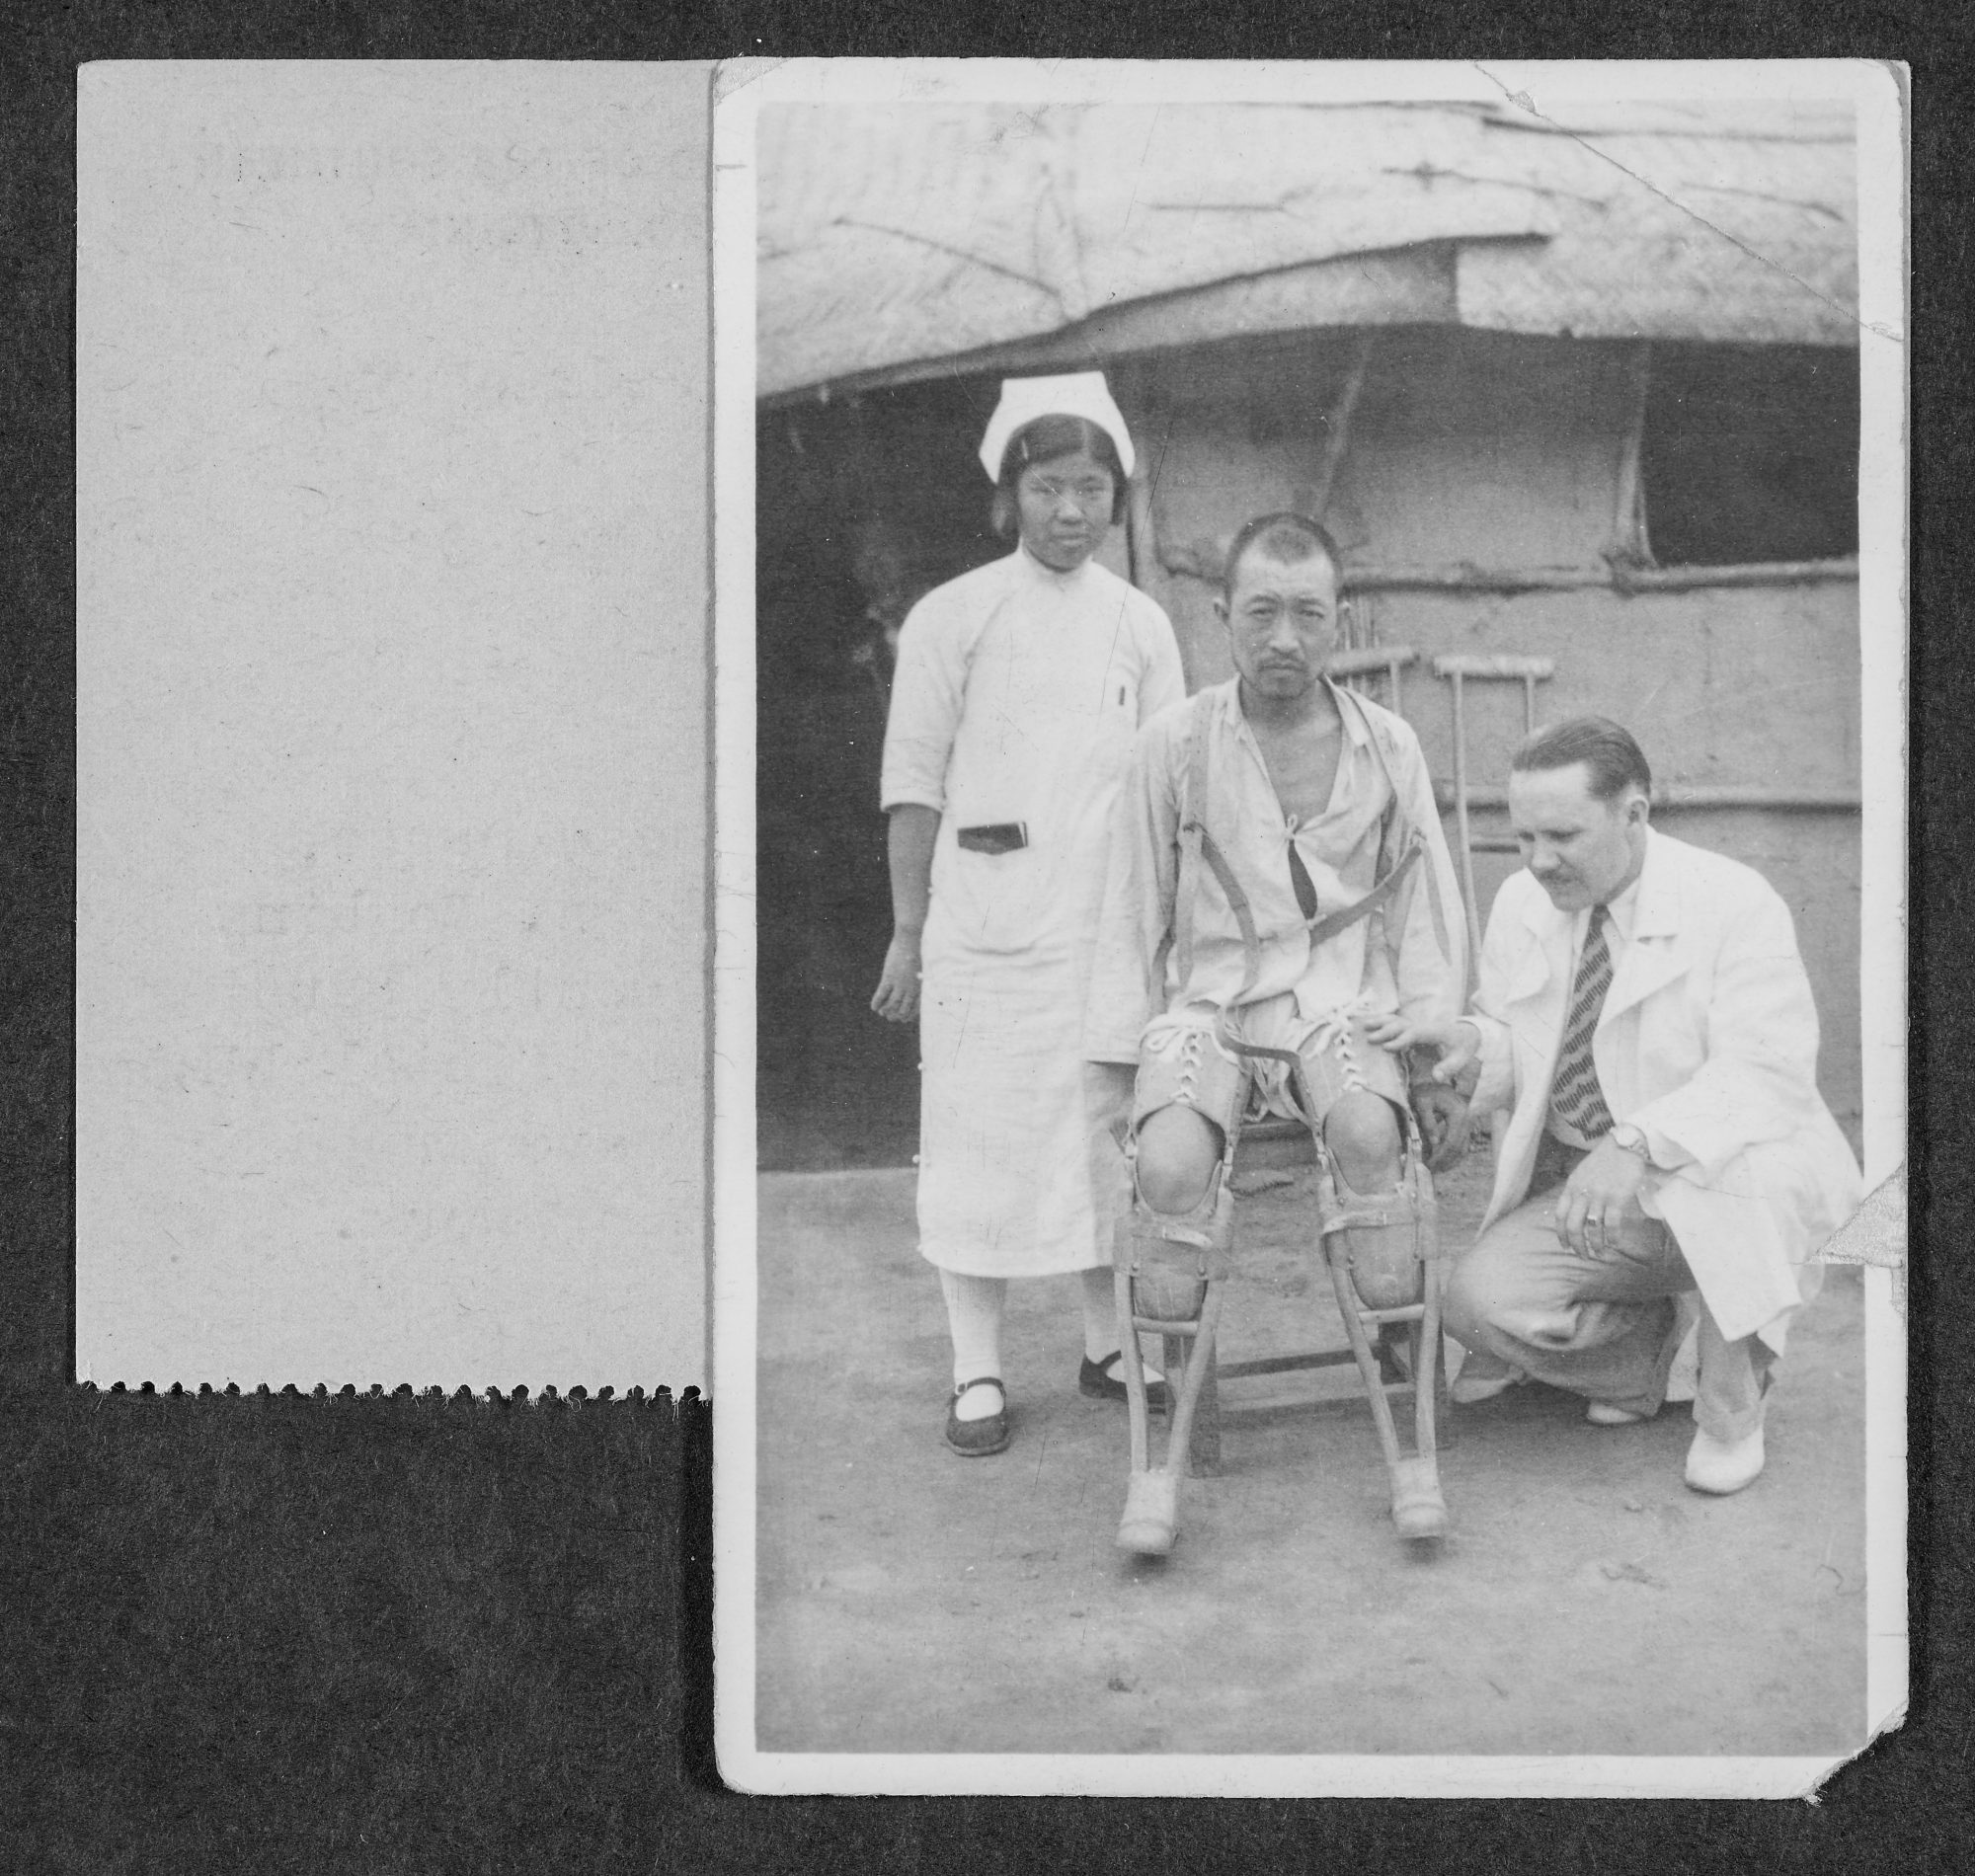 Dr. Hugh Humphrey and a Chinese nurse examine a patient with artificial legs after his injuries from a war bombing necessitated amputations.